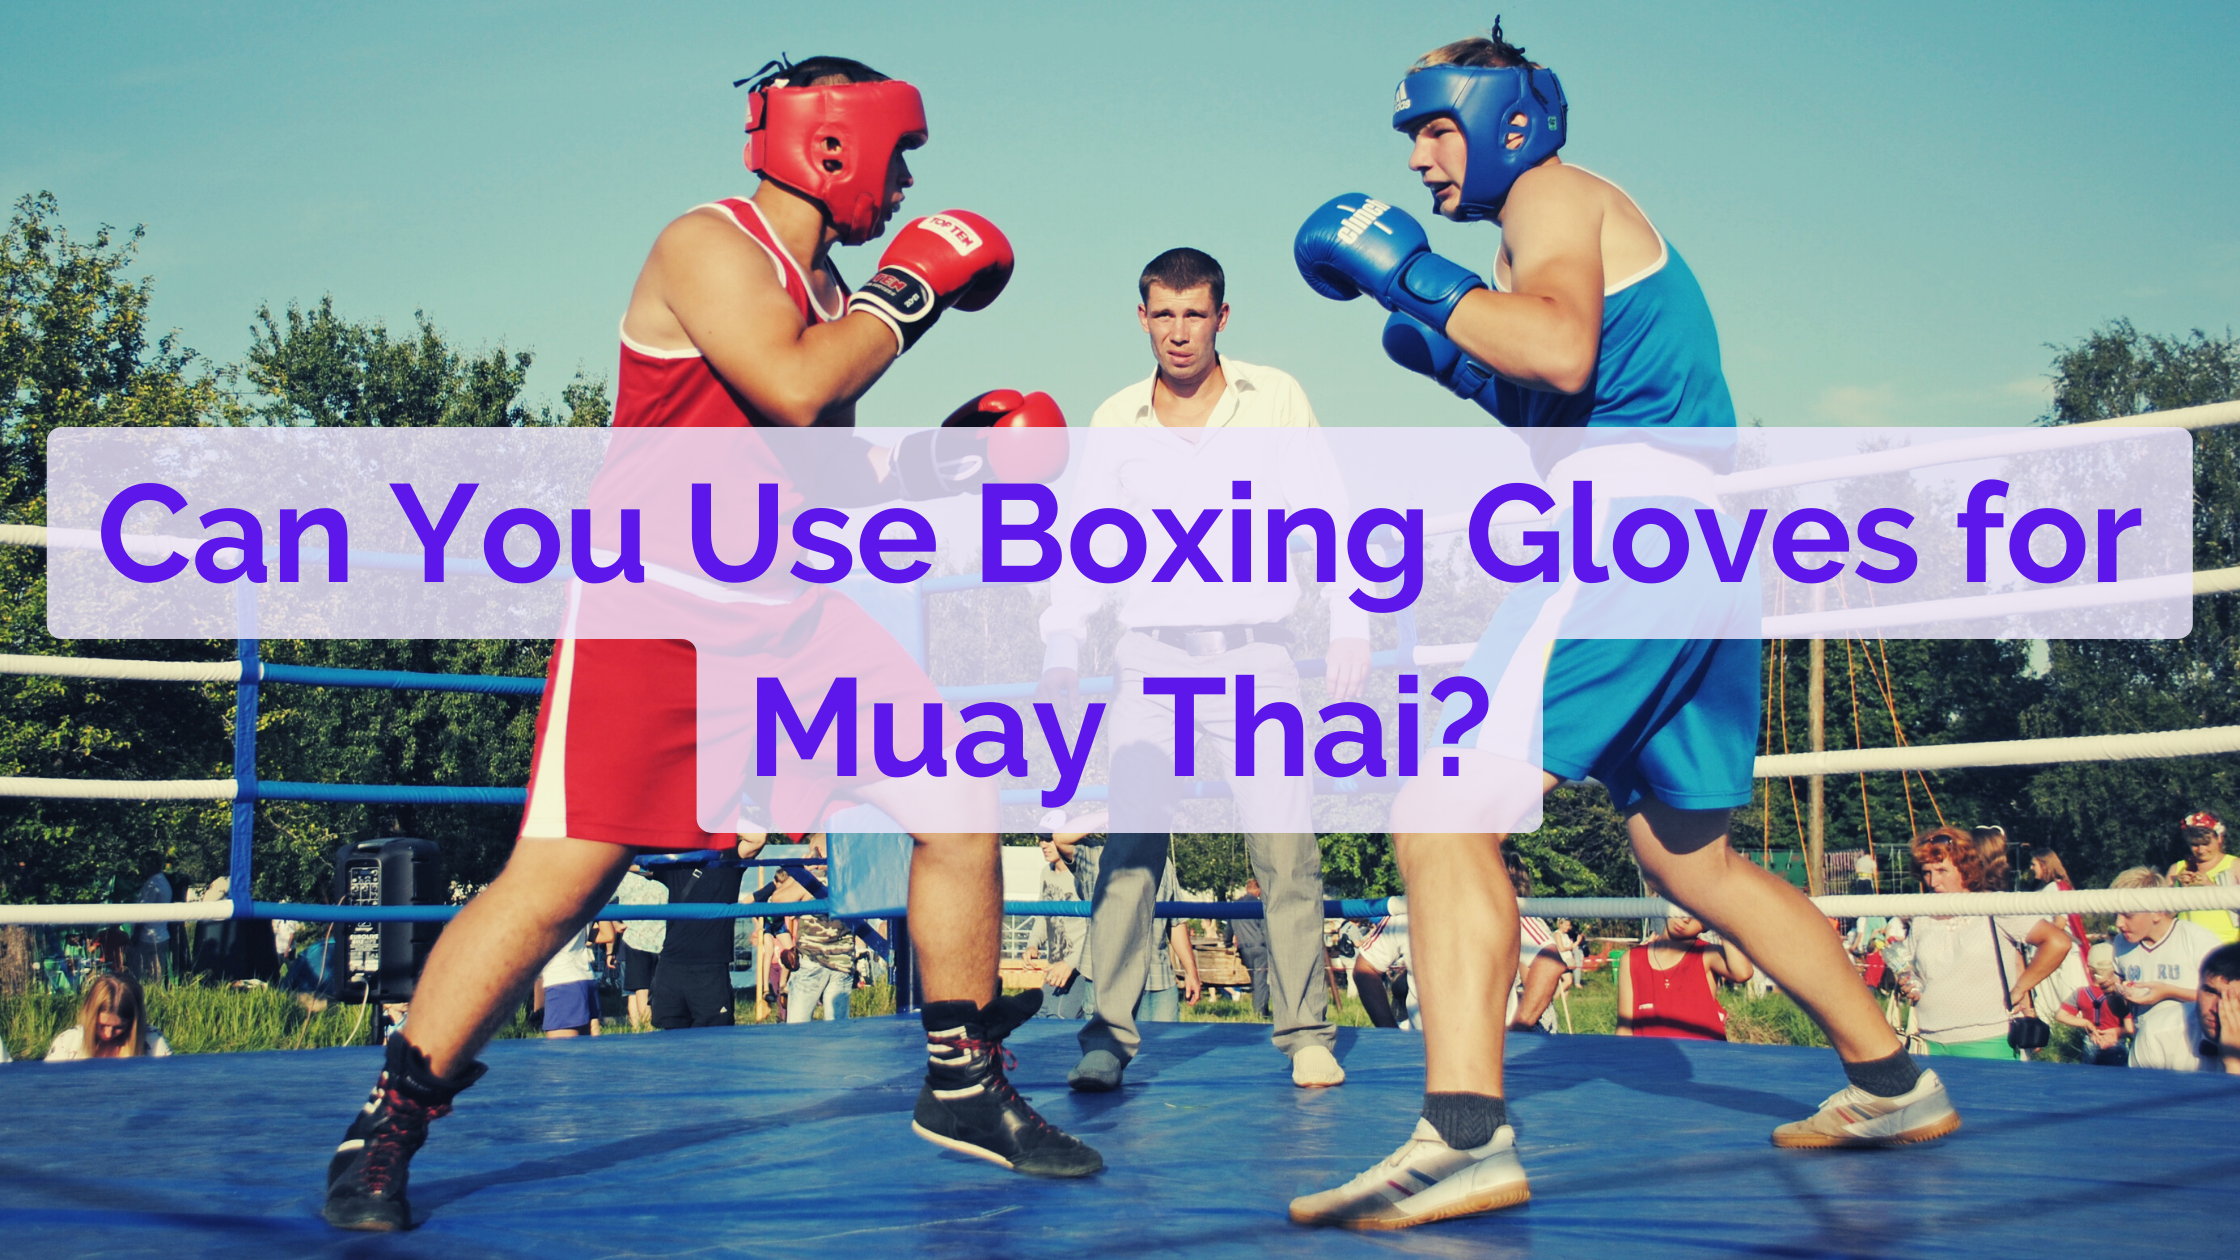 Can You Use Boxing Gloves for Muay Thai?